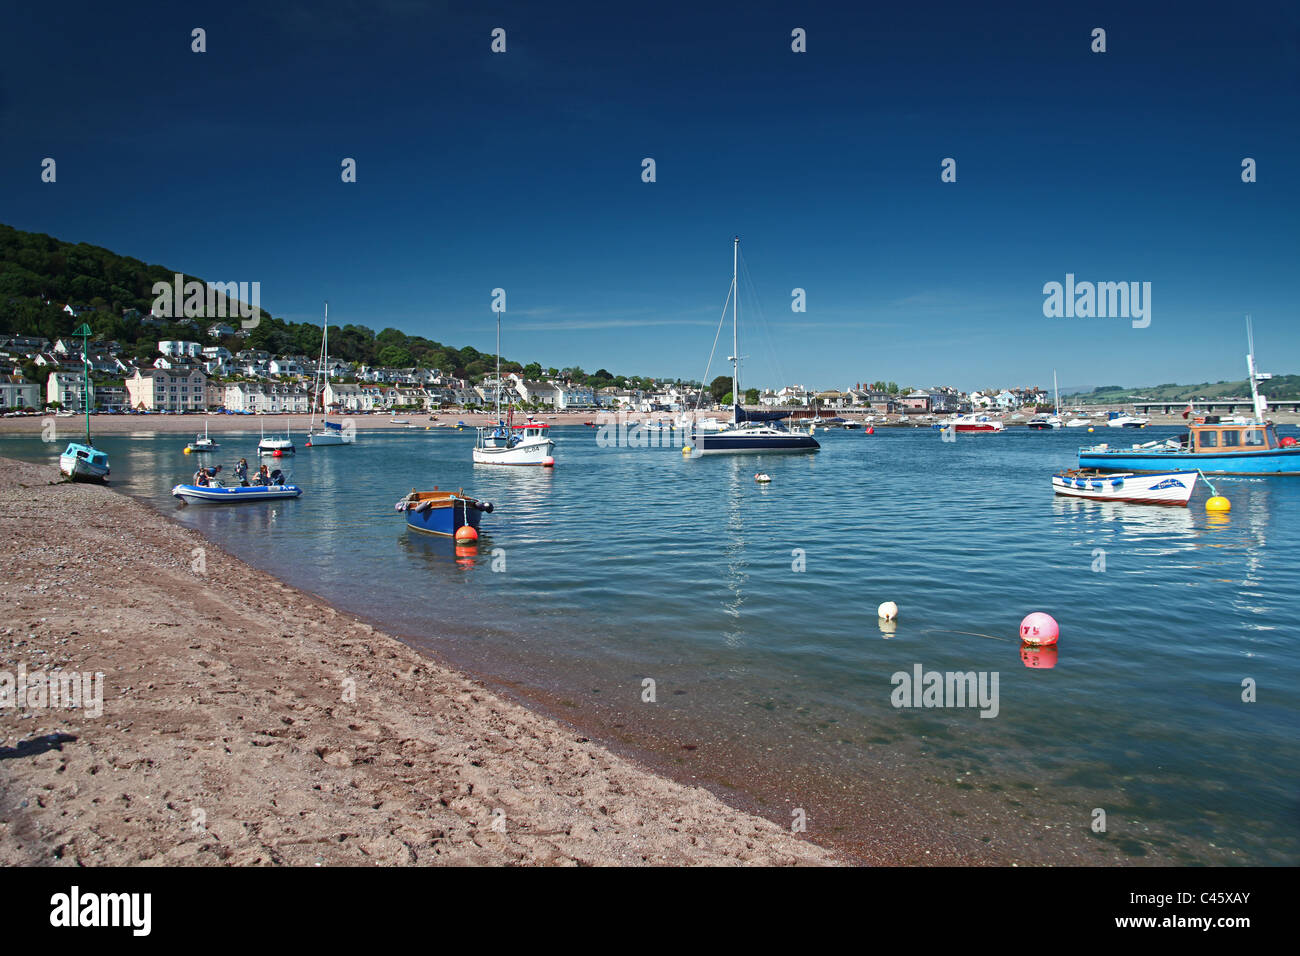 The view from Teignmouth across the estuary of the River Teign towards Shaldon on the opposite bank, Devon, England, UK Stock Photo